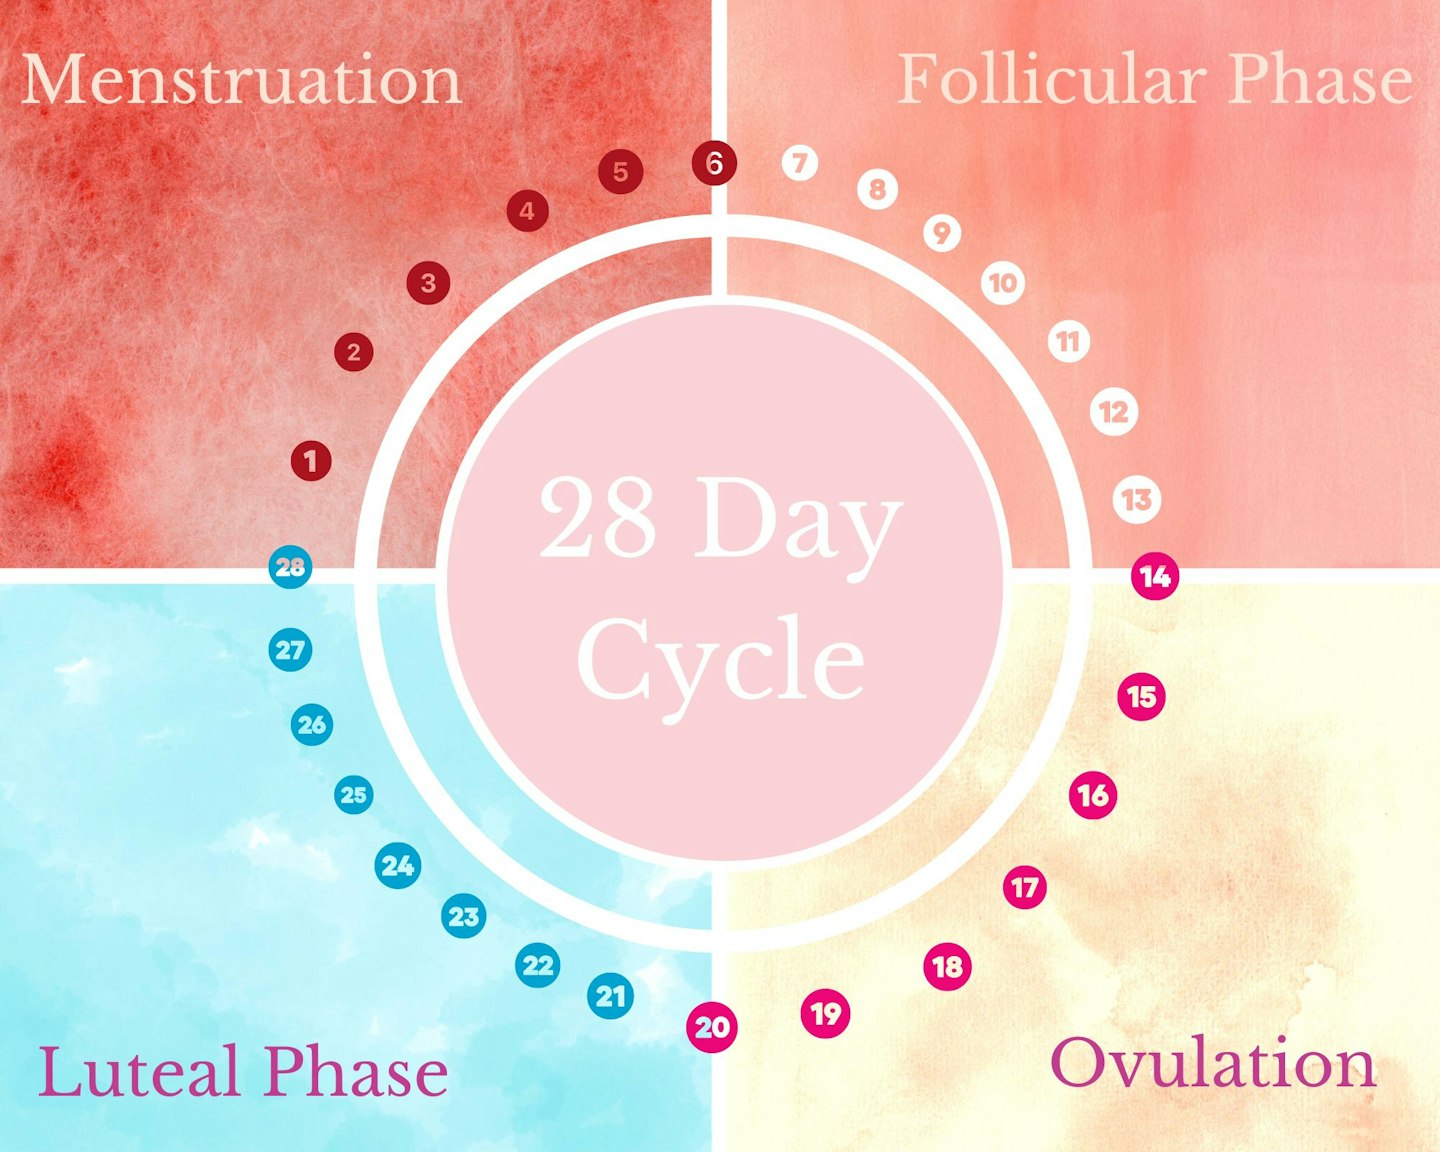 So which is it? Are women fertile just 24 hours or up to week per